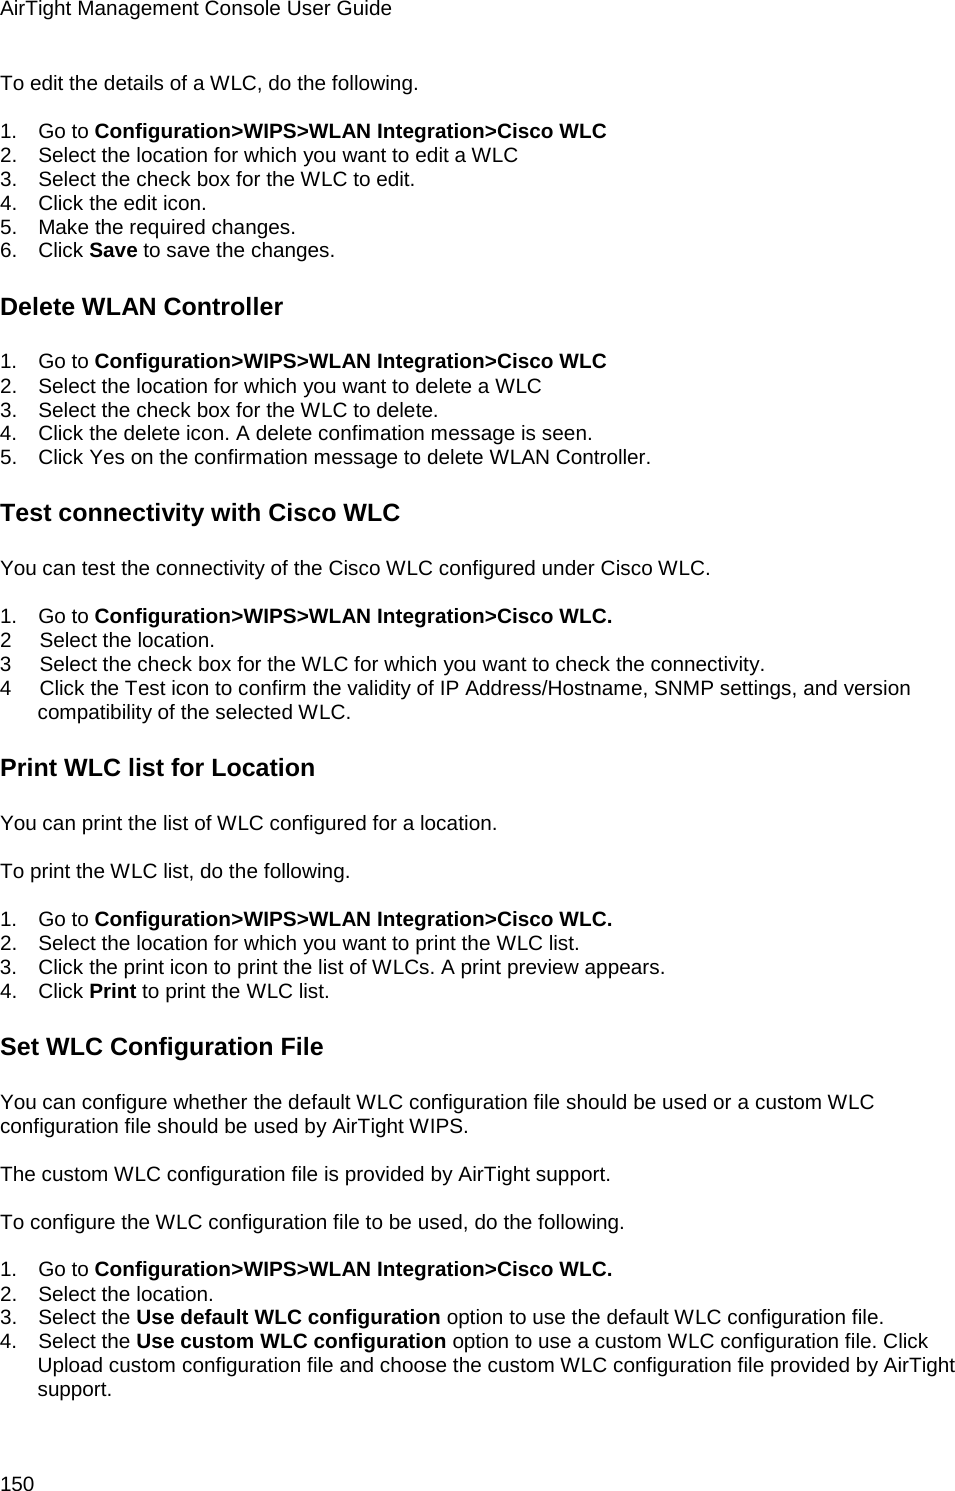 AirTight Management Console User Guide 150 To edit the details of a WLC, do the following.   1.      Go to Configuration&gt;WIPS&gt;WLAN Integration&gt;Cisco WLC 2.      Select the location for which you want to edit a WLC 3.      Select the check box for the WLC to edit. 4.      Click the edit icon. 5.      Make the required changes. 6.      Click Save to save the changes. Delete WLAN Controller 1.      Go to Configuration&gt;WIPS&gt;WLAN Integration&gt;Cisco WLC 2.      Select the location for which you want to delete a WLC 3.      Select the check box for the WLC to delete. 4.      Click the delete icon. A delete confimation message is seen. 5.      Click Yes on the confirmation message to delete WLAN Controller. Test connectivity with Cisco WLC You can test the connectivity of the Cisco WLC configured under Cisco WLC.   1.      Go to Configuration&gt;WIPS&gt;WLAN Integration&gt;Cisco WLC. 2        Select the location. 3        Select the check box for the WLC for which you want to check the connectivity. 4        Click the Test icon to confirm the validity of IP Address/Hostname, SNMP settings, and version compatibility of the selected WLC. Print WLC list for Location You can print the list of WLC configured for a location.    To print the WLC list, do the following.   1.      Go to Configuration&gt;WIPS&gt;WLAN Integration&gt;Cisco WLC. 2.      Select the location for which you want to print the WLC list. 3.      Click the print icon to print the list of WLCs. A print preview appears. 4.      Click Print to print the WLC list. Set WLC Configuration File You can configure whether the default WLC configuration file should be used or a custom WLC configuration file should be used by AirTight WIPS.   The custom WLC configuration file is provided by AirTight support.    To configure the WLC configuration file to be used, do the following.   1.      Go to Configuration&gt;WIPS&gt;WLAN Integration&gt;Cisco WLC. 2.      Select the location. 3.      Select the Use default WLC configuration option to use the default WLC configuration file. 4.      Select the Use custom WLC configuration option to use a custom WLC configuration file. Click Upload custom configuration file and choose the custom WLC configuration file provided by AirTight support. 